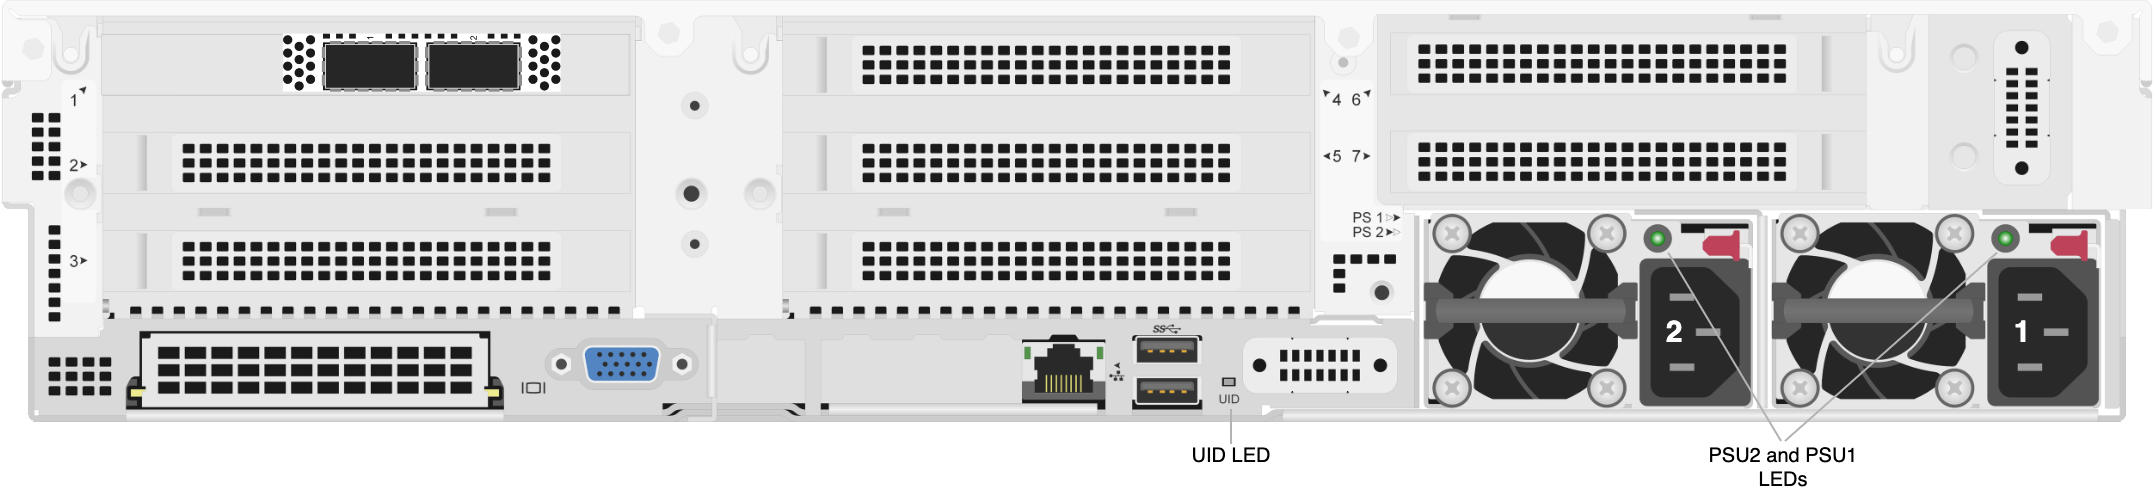 UID, PSU2, and PSU1 LEDs on the rear panel of the HPE Apollo 4200 Gen10 Plus node